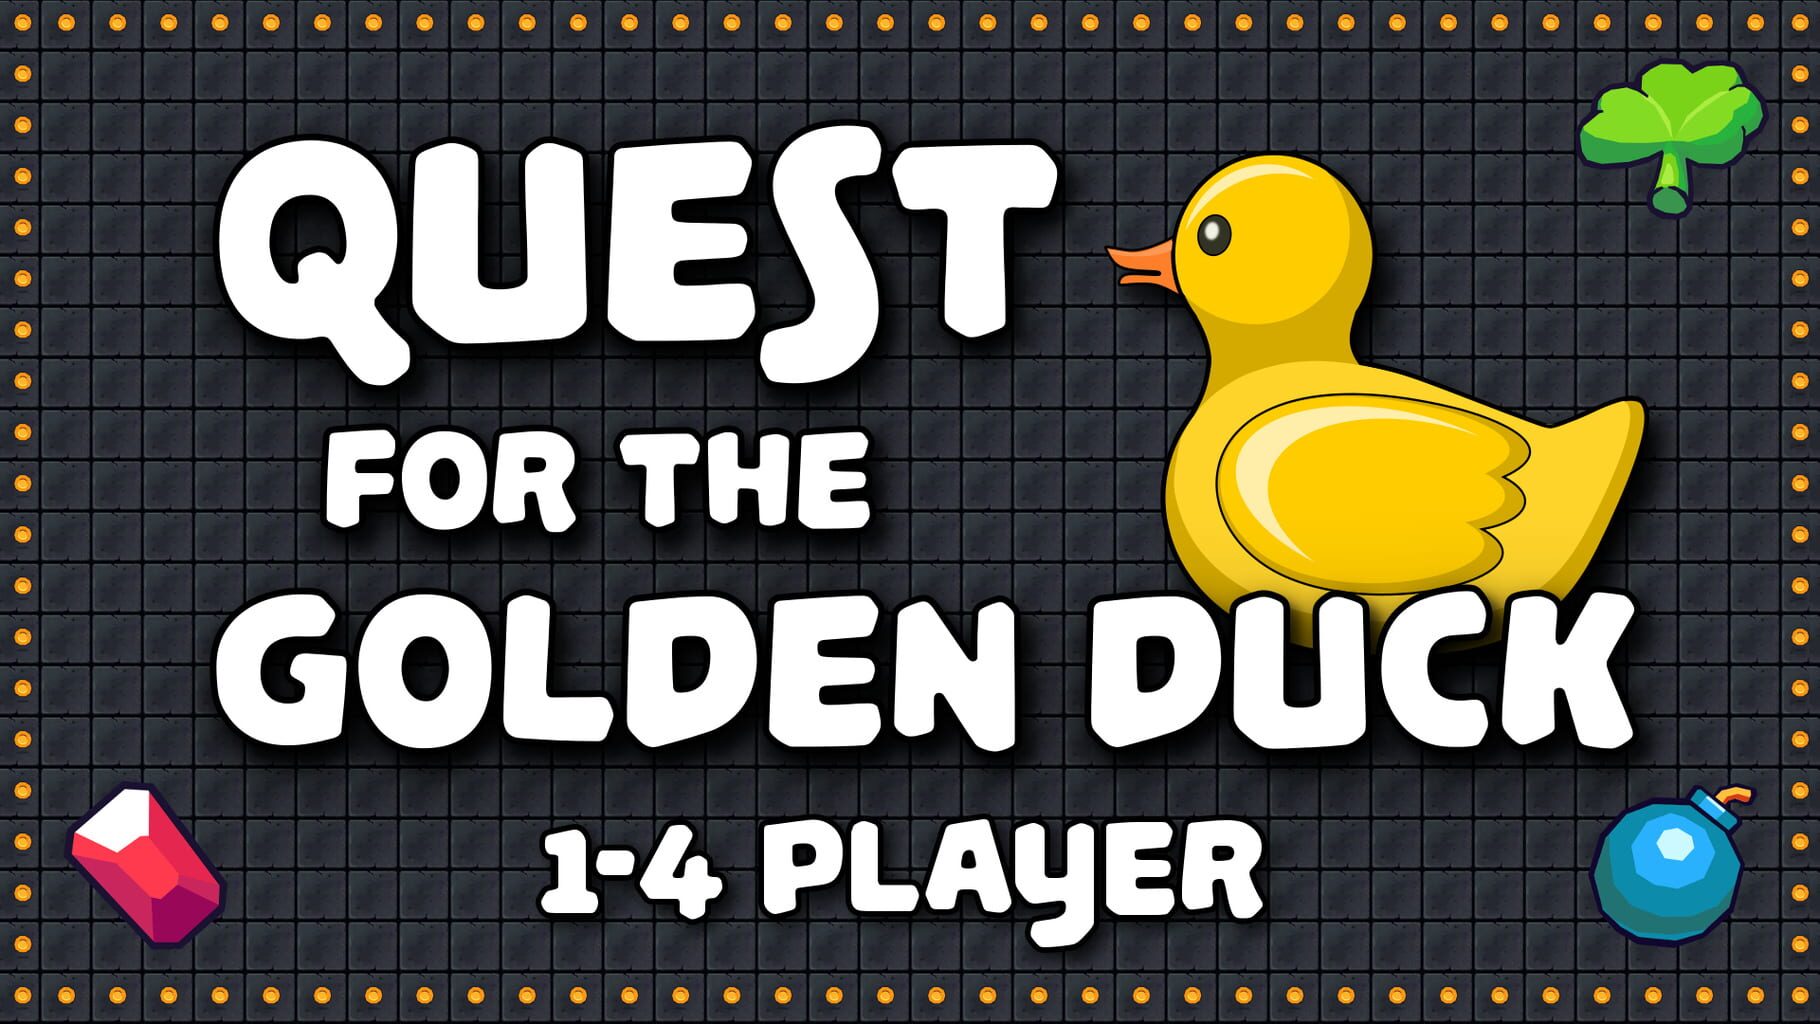 Quest for the Golden Duck Image